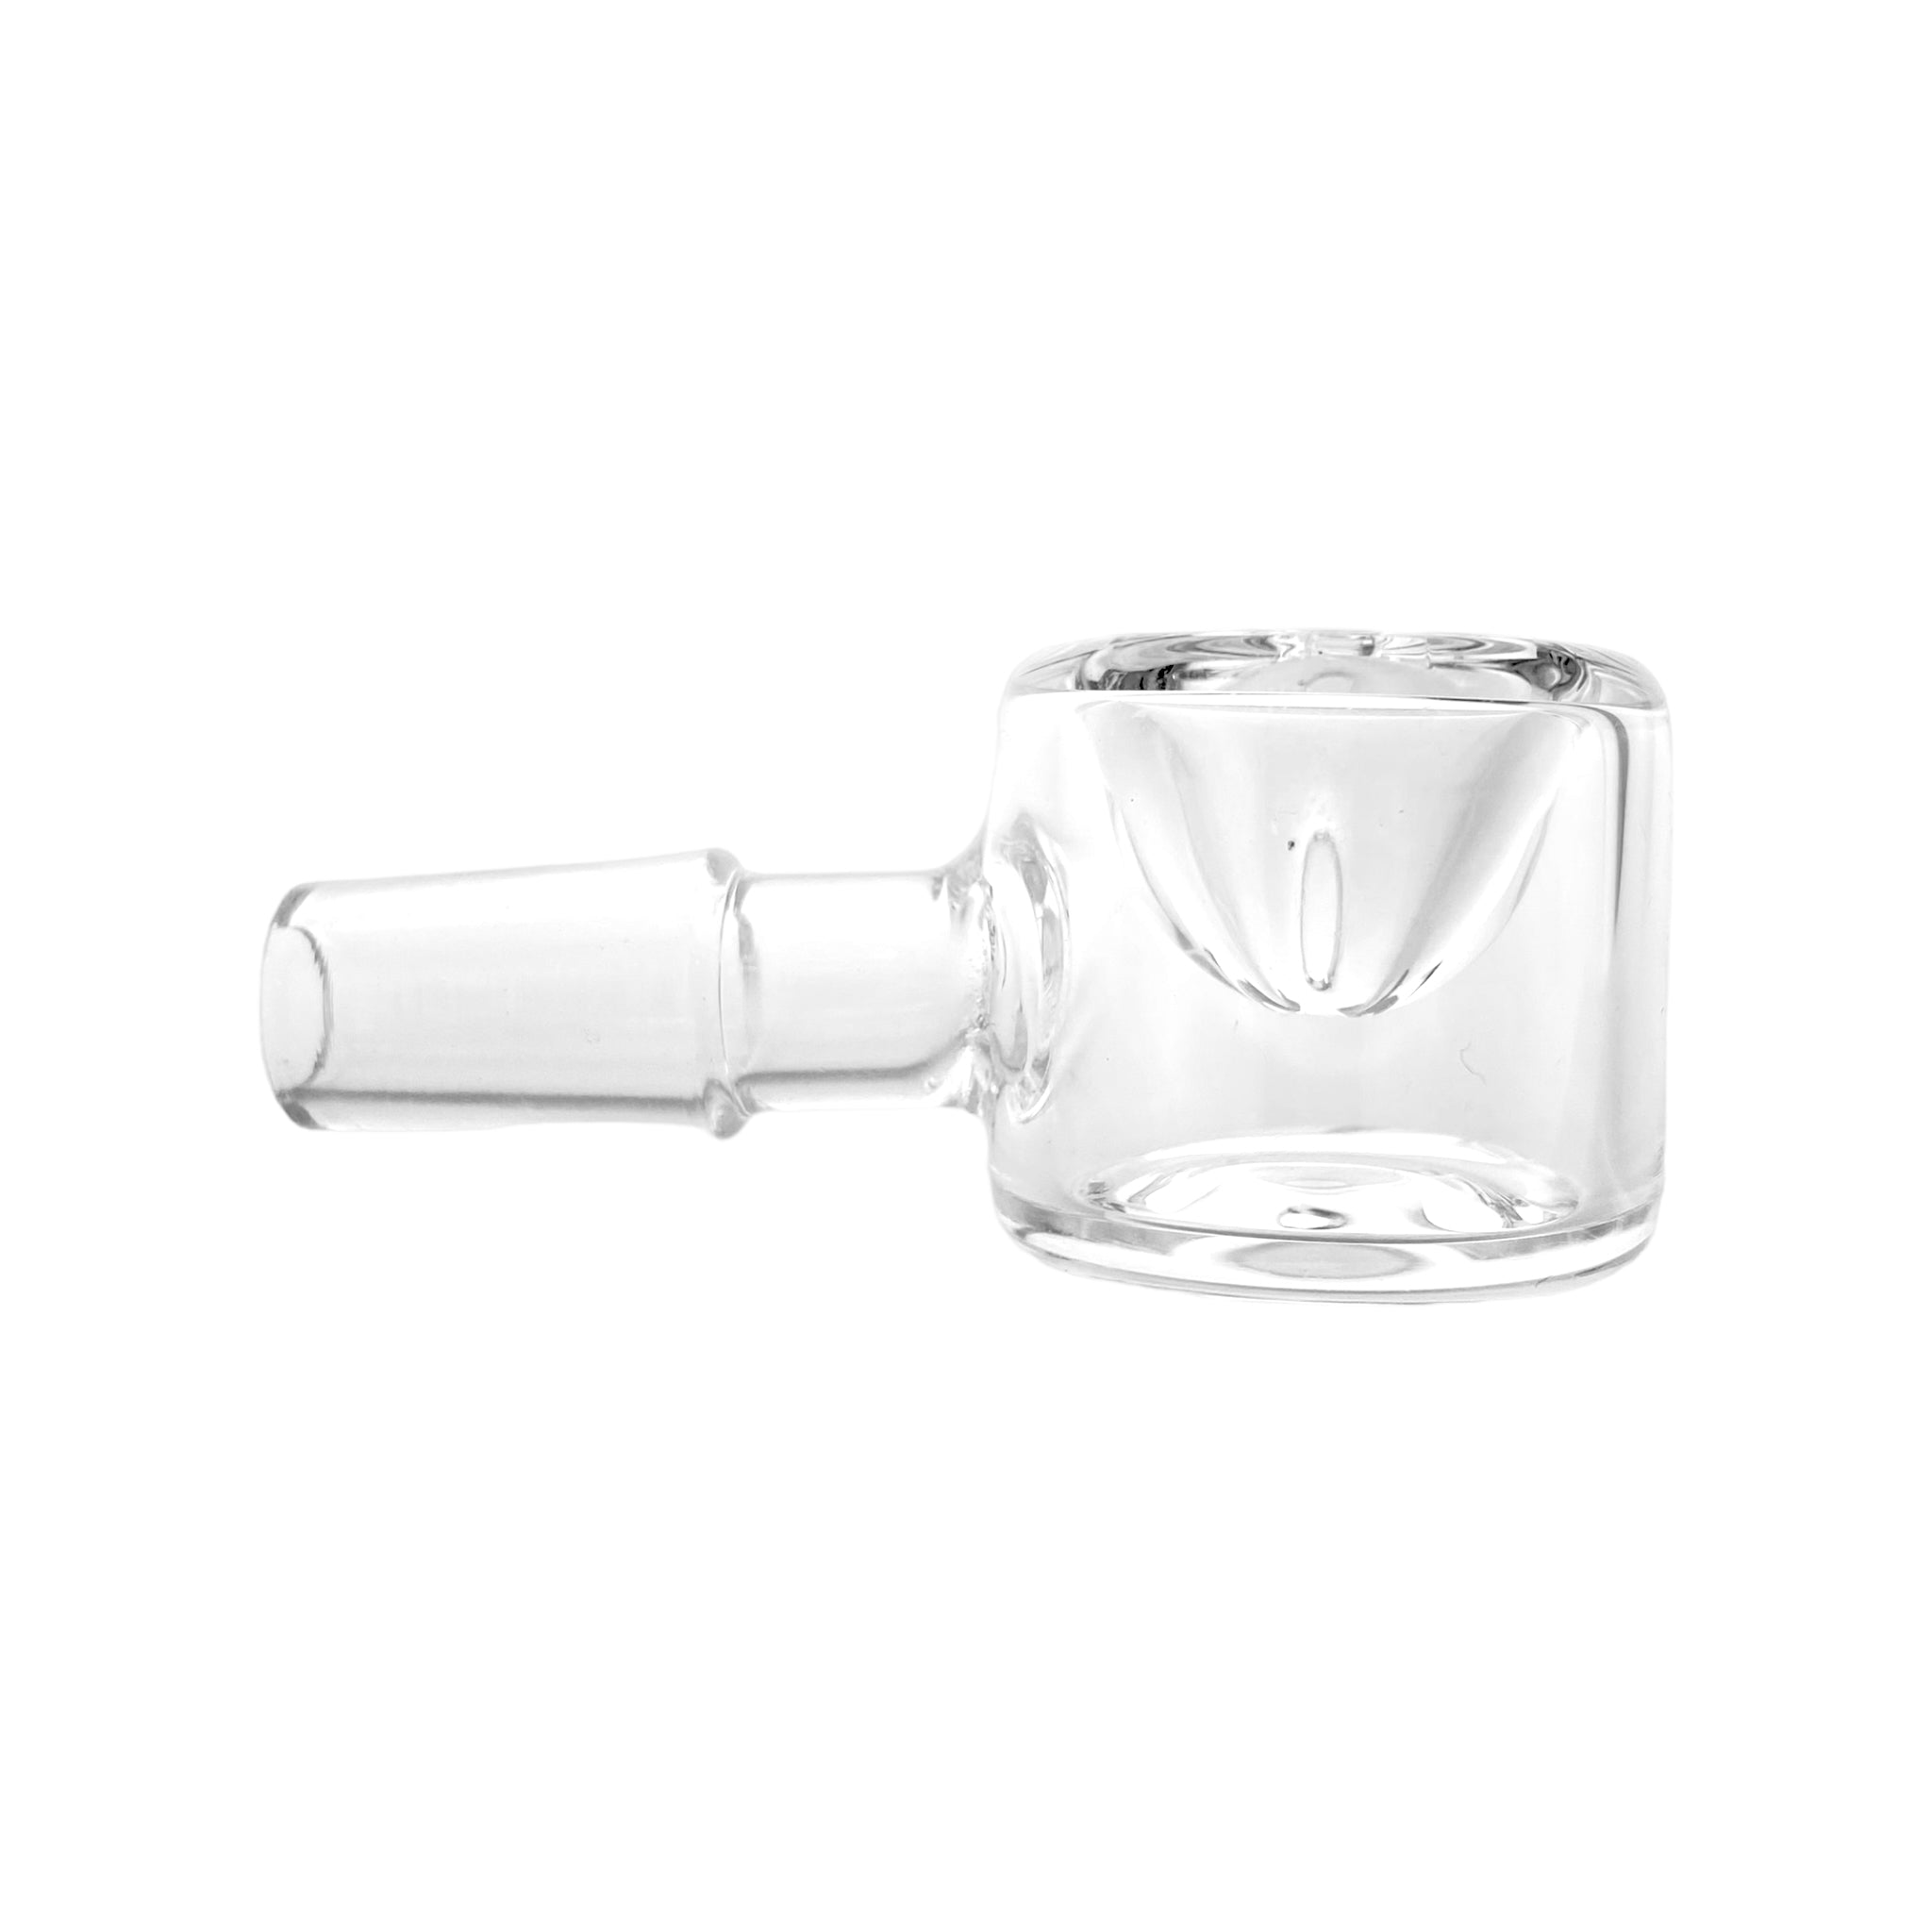 Nectar Collector Flower Bowl 14mm